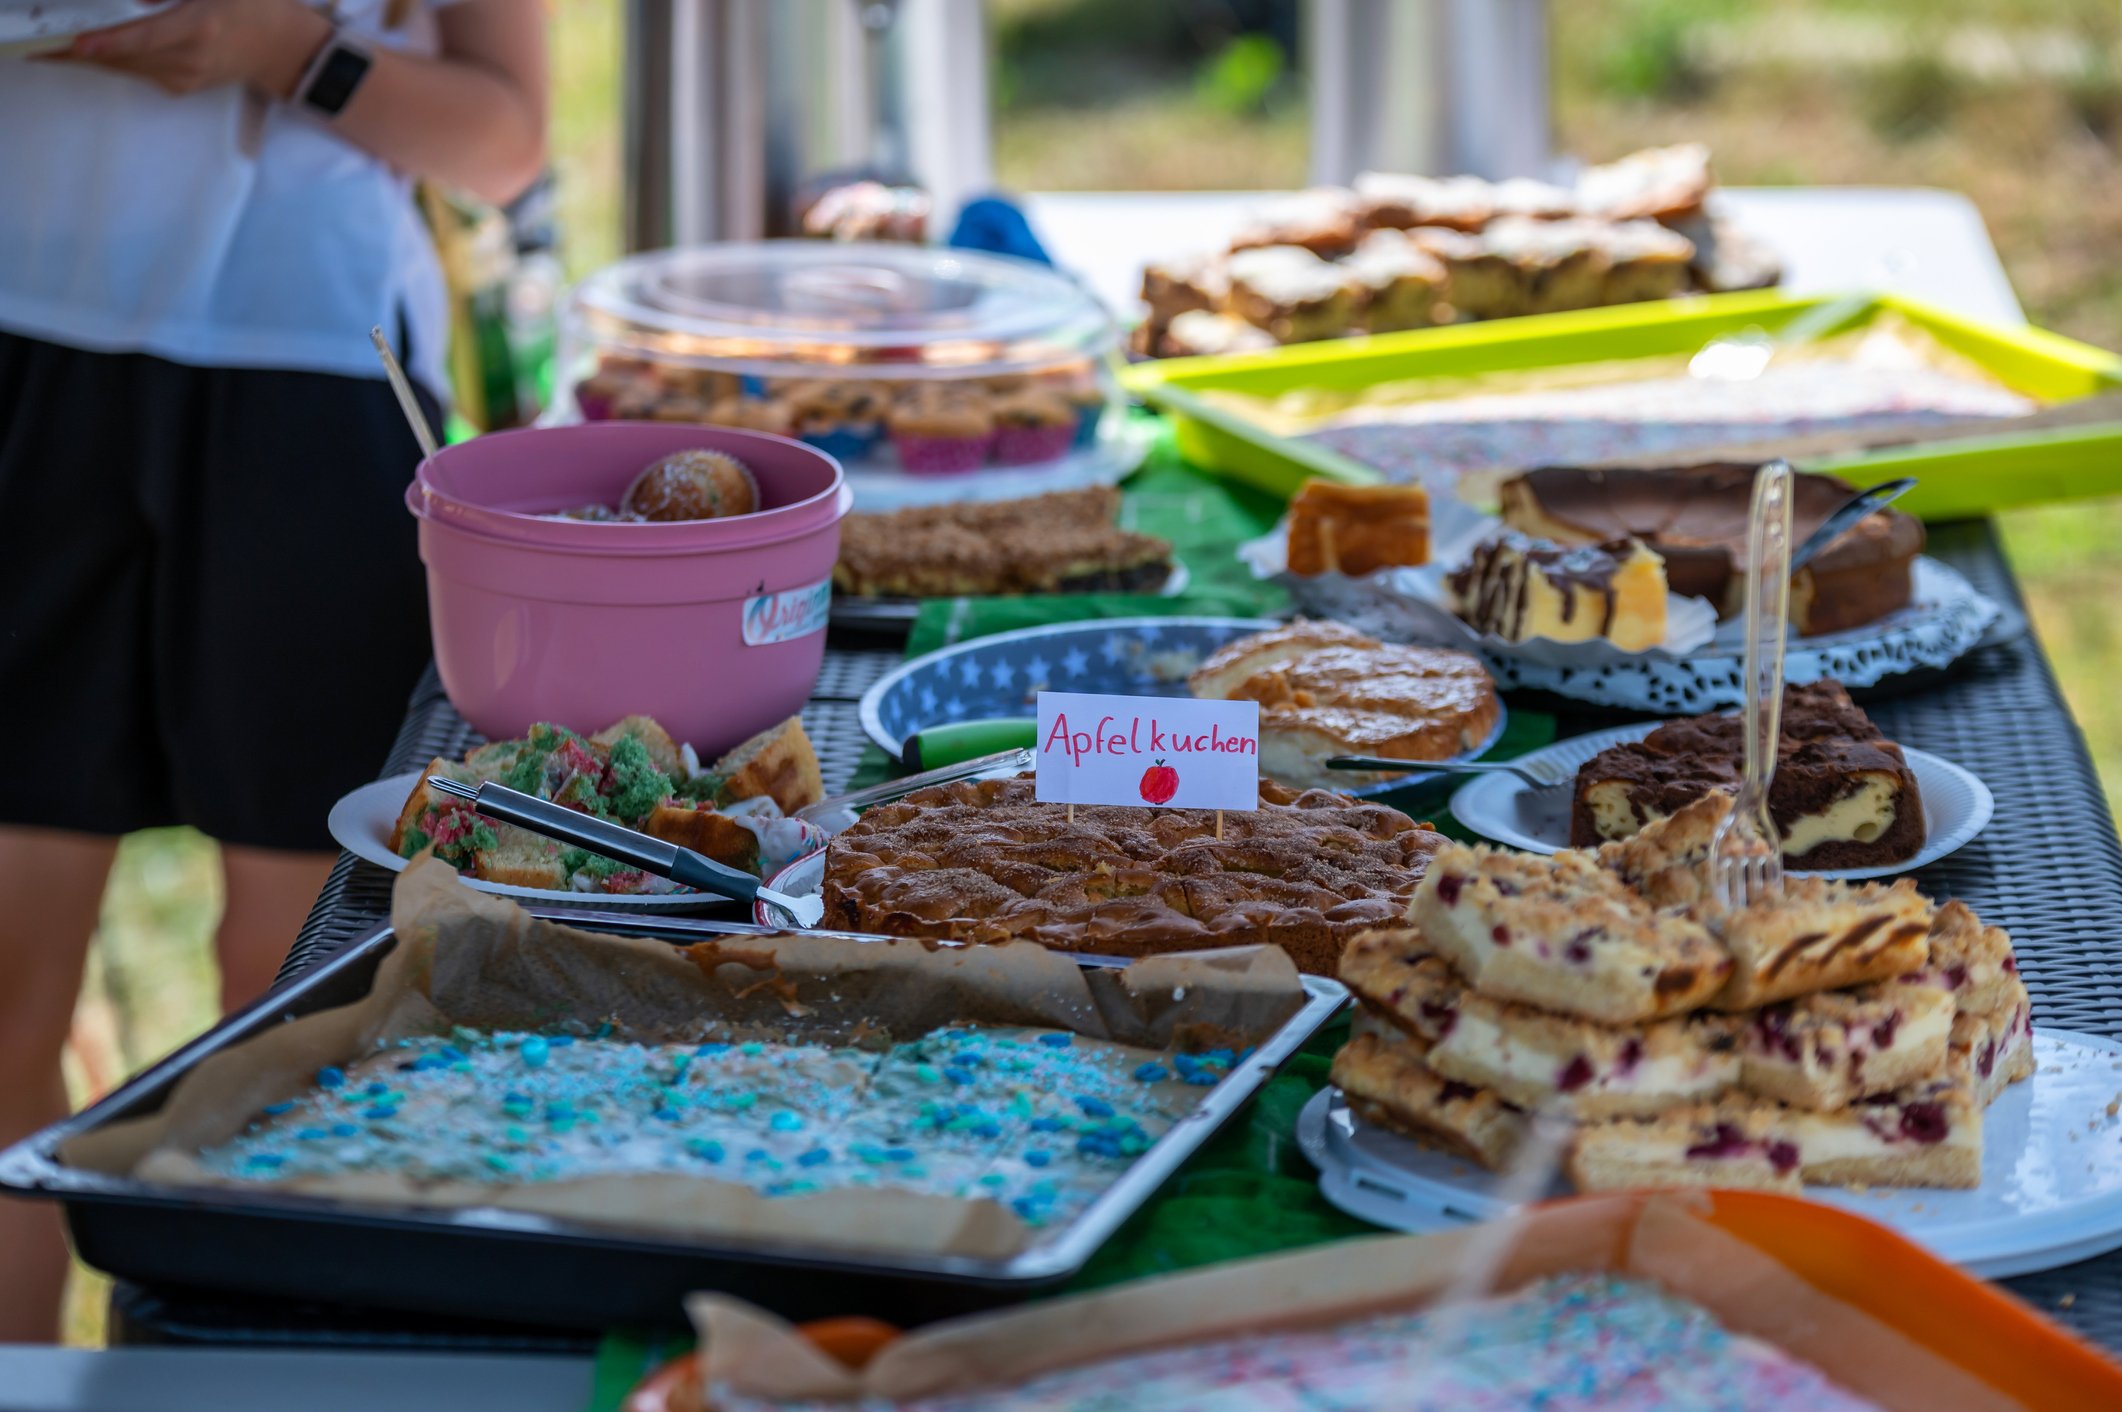 Variety of baked goods on table